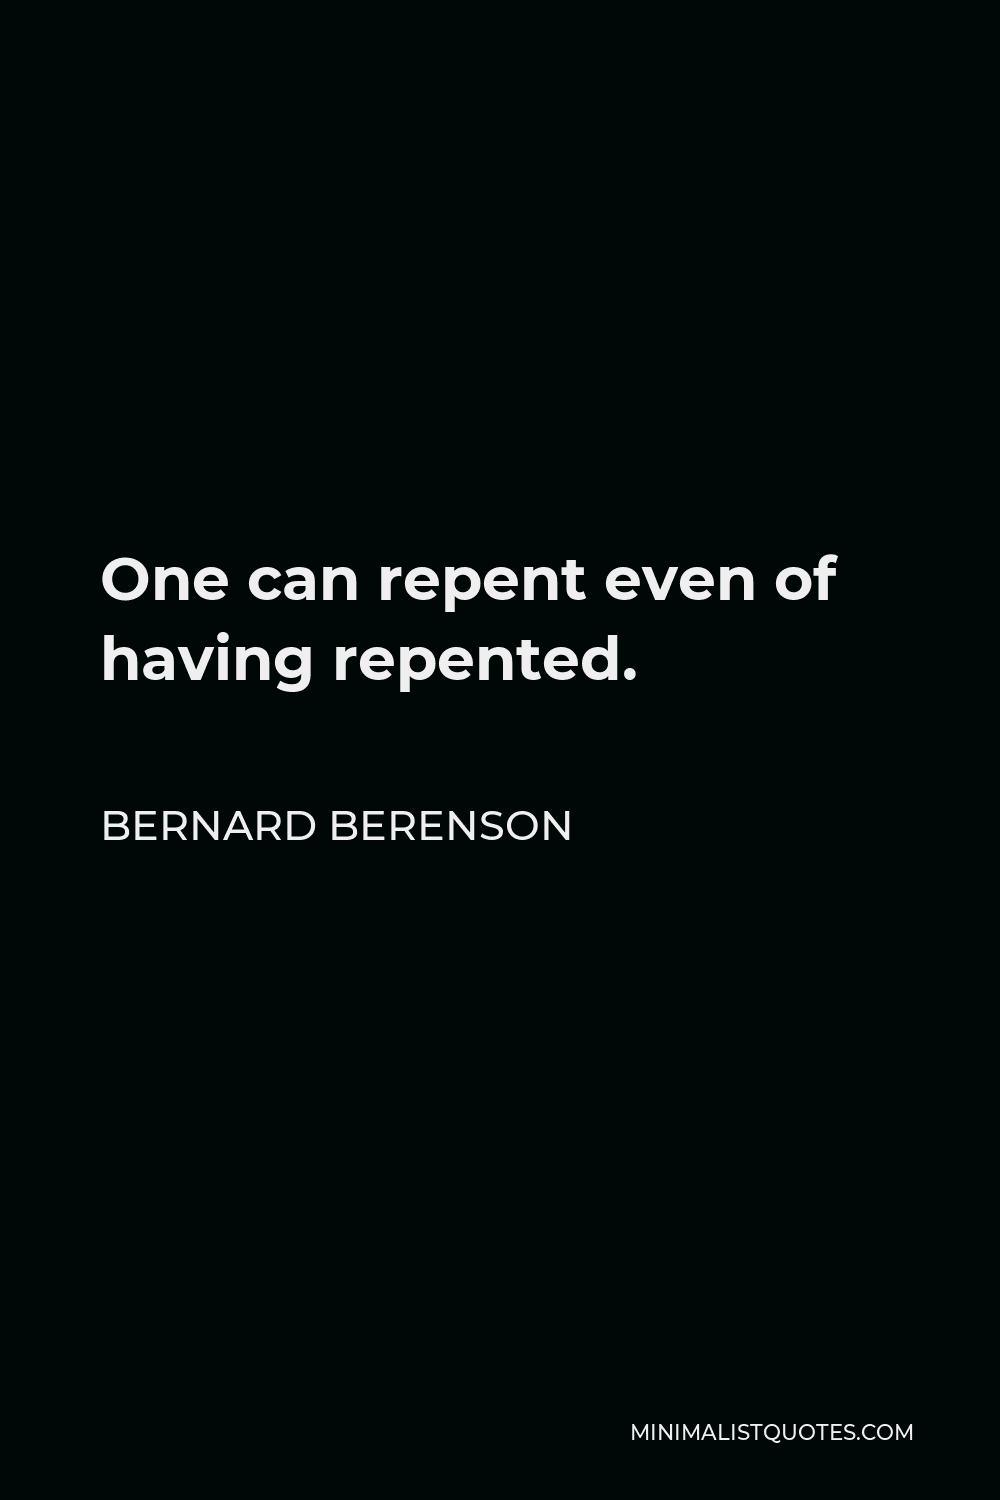 Bernard Berenson Quote - One can repent even of having repented.